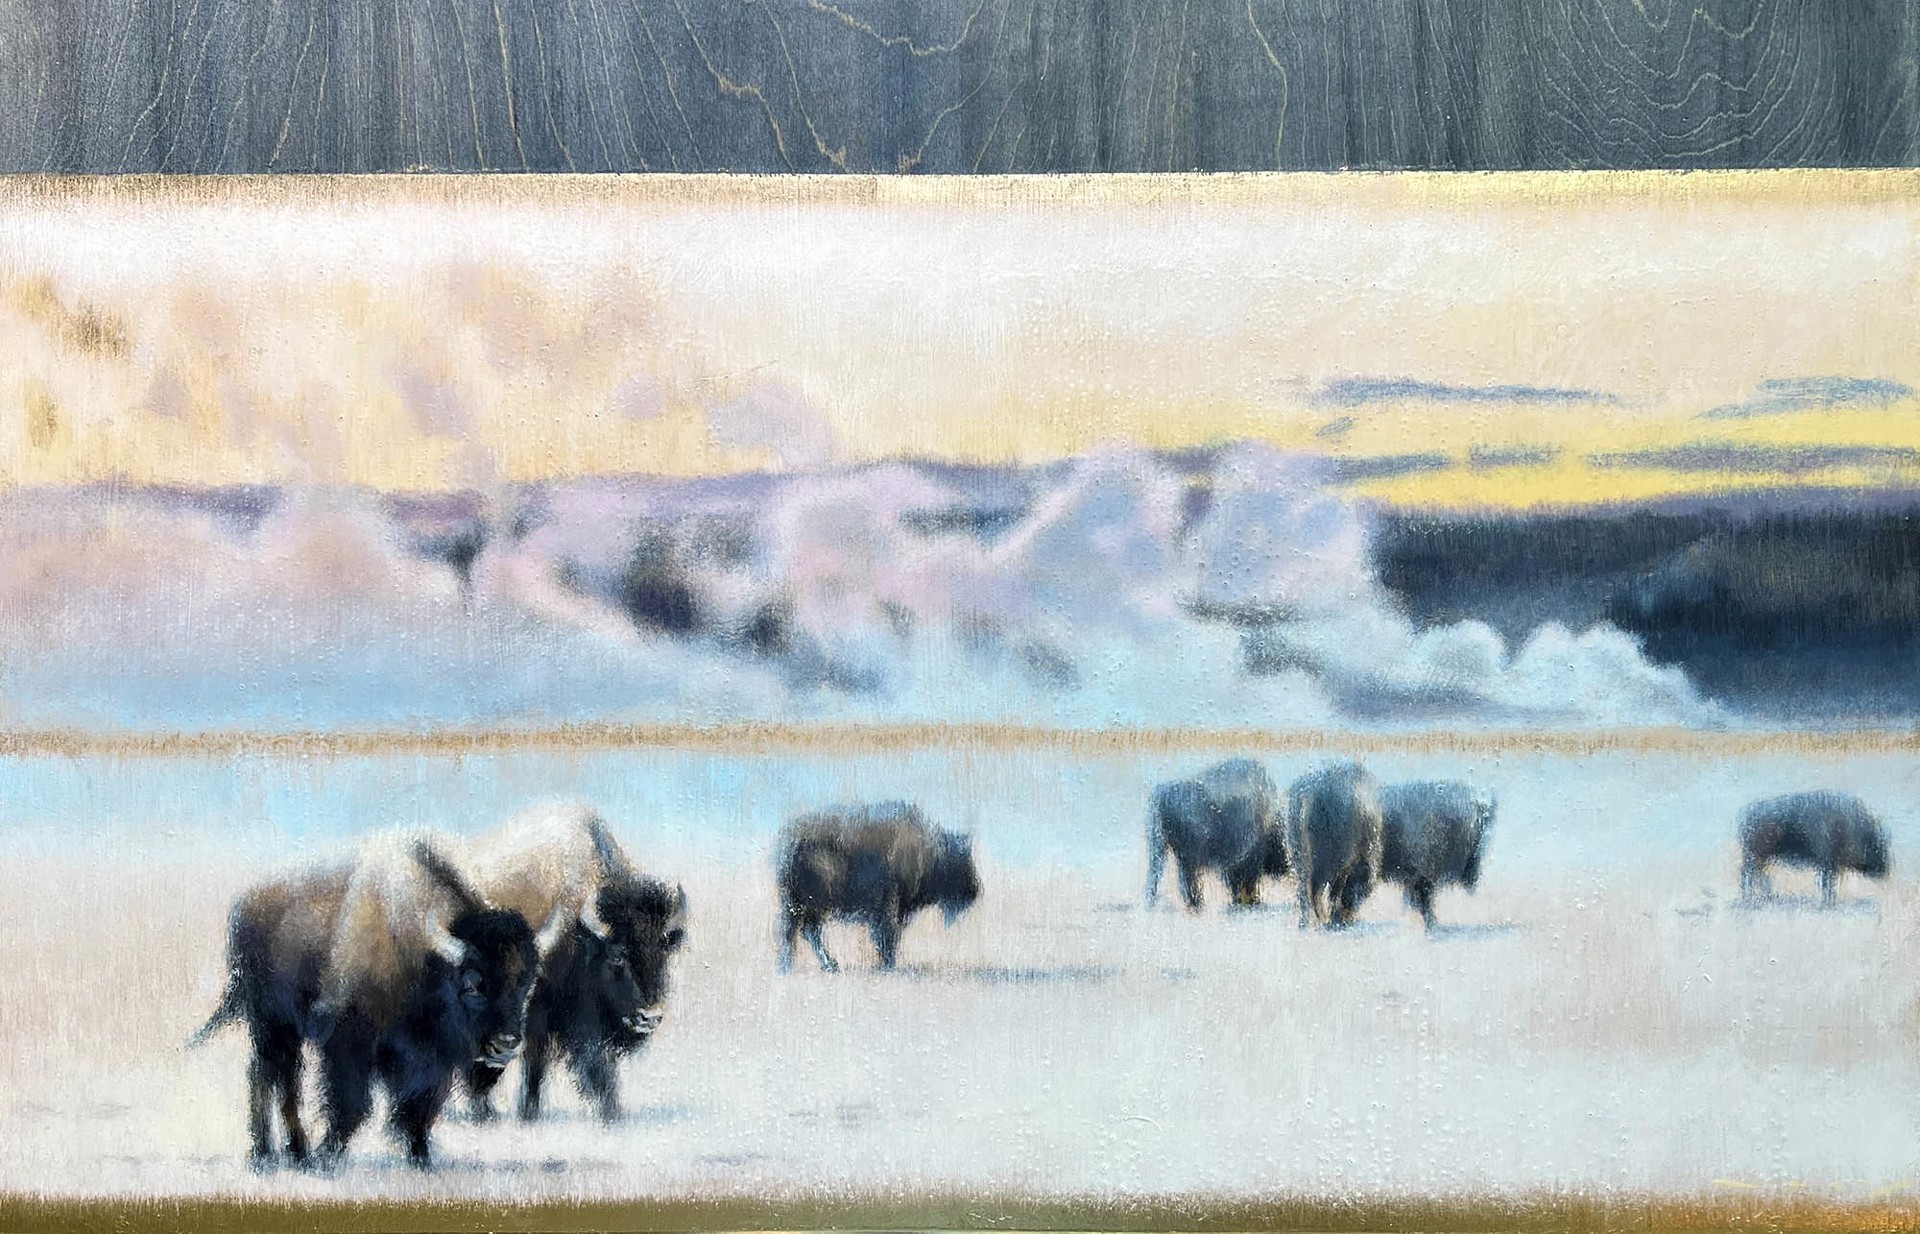 Original Painting Featuring A Bison Herd Walking Through Plains With Geyers In Distance, Gold Leaf Detail And Wooden Panel Showing Through